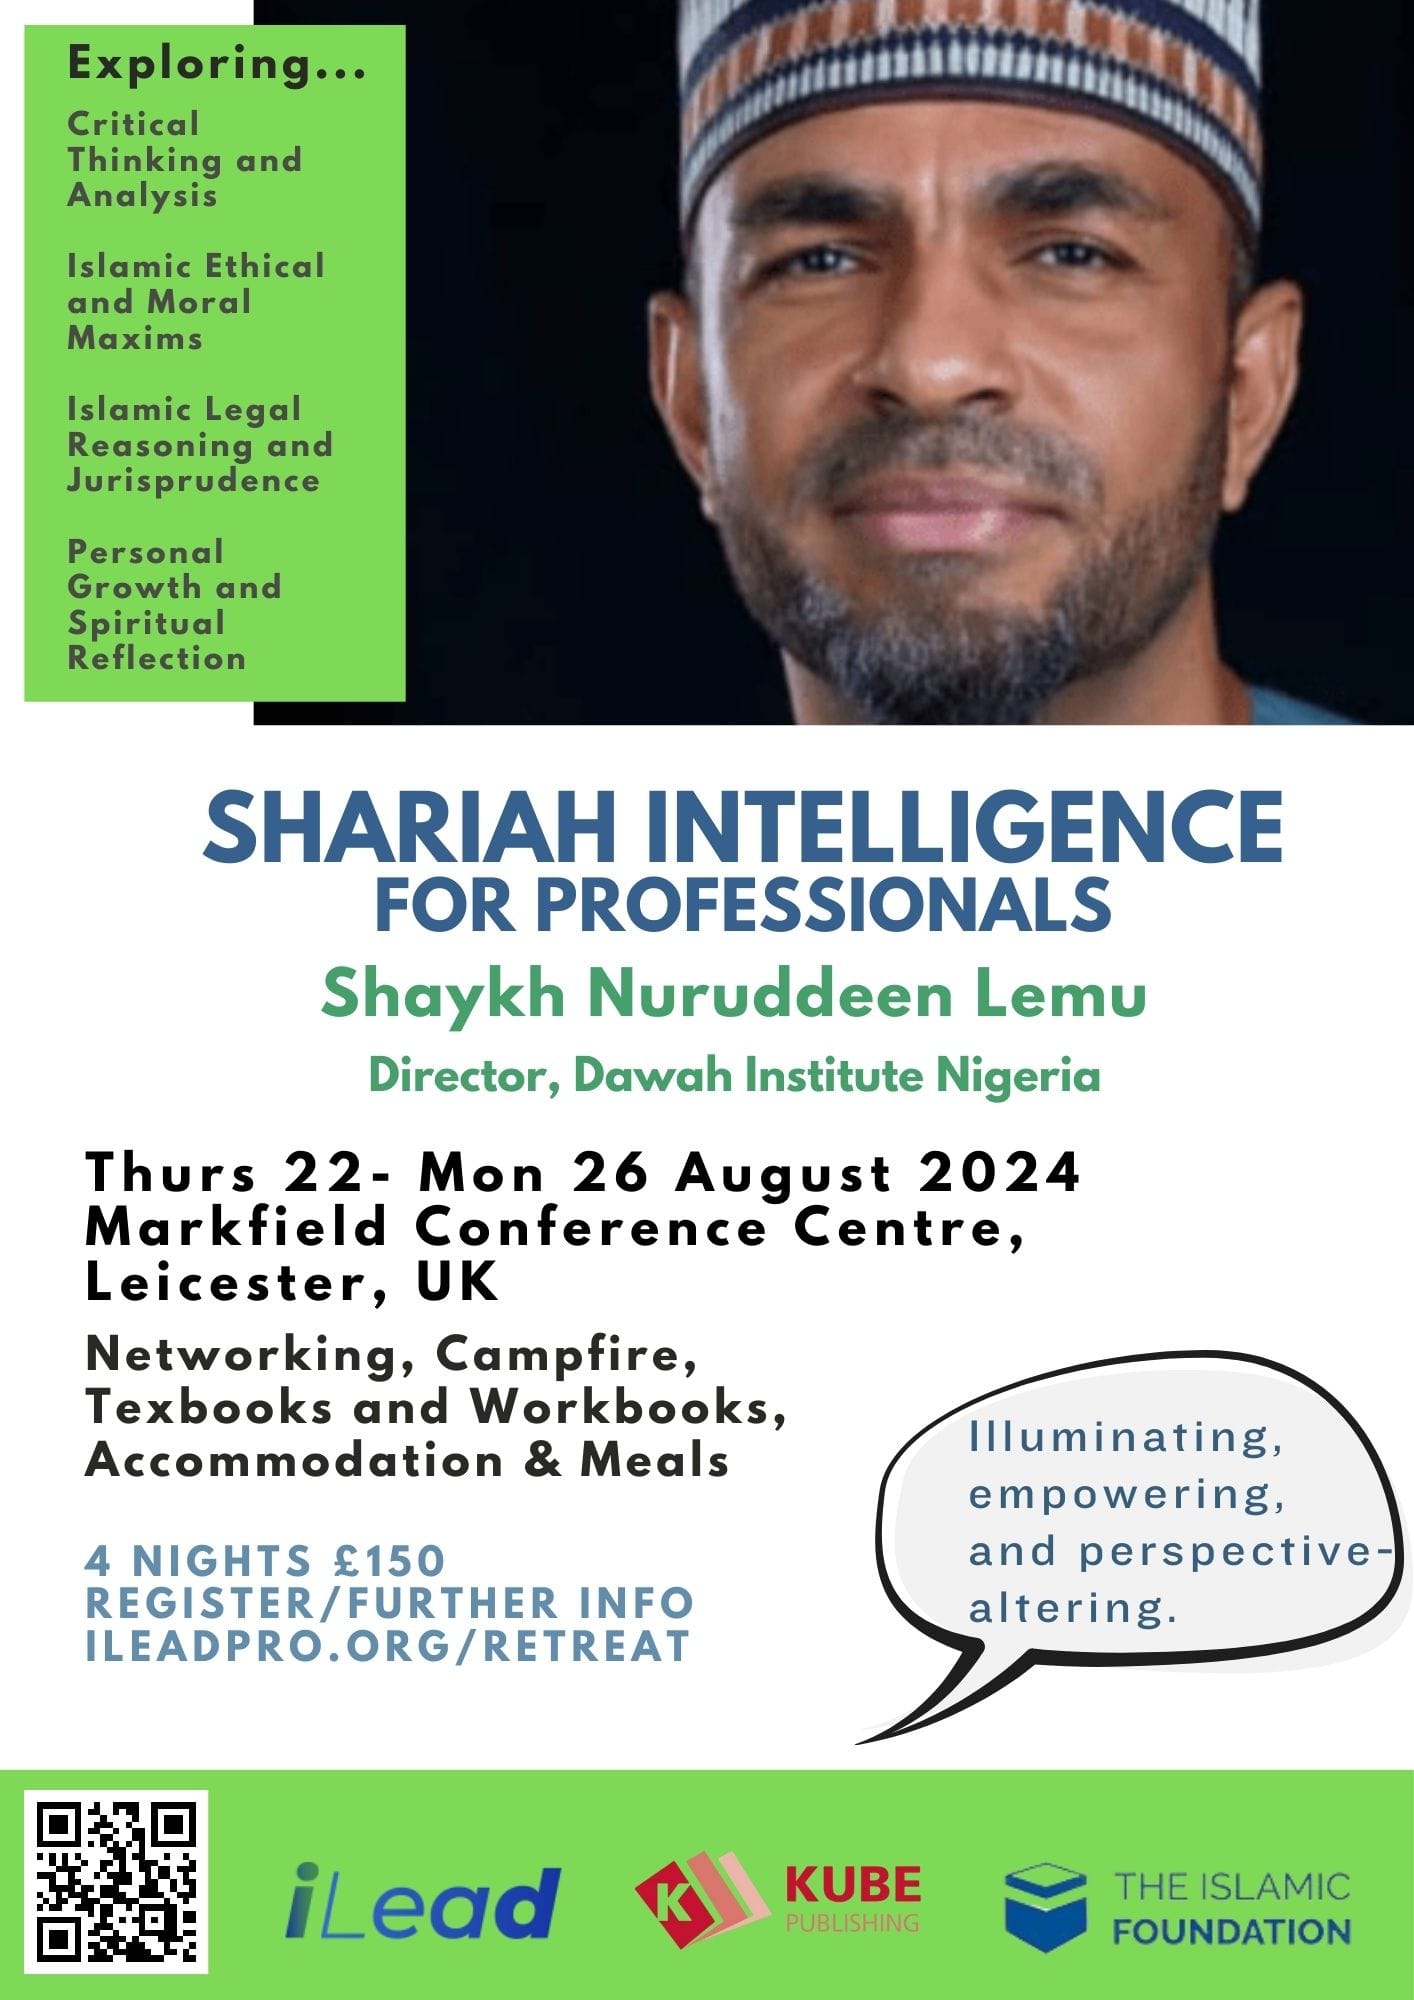 Shariah Intelligence for Professionals